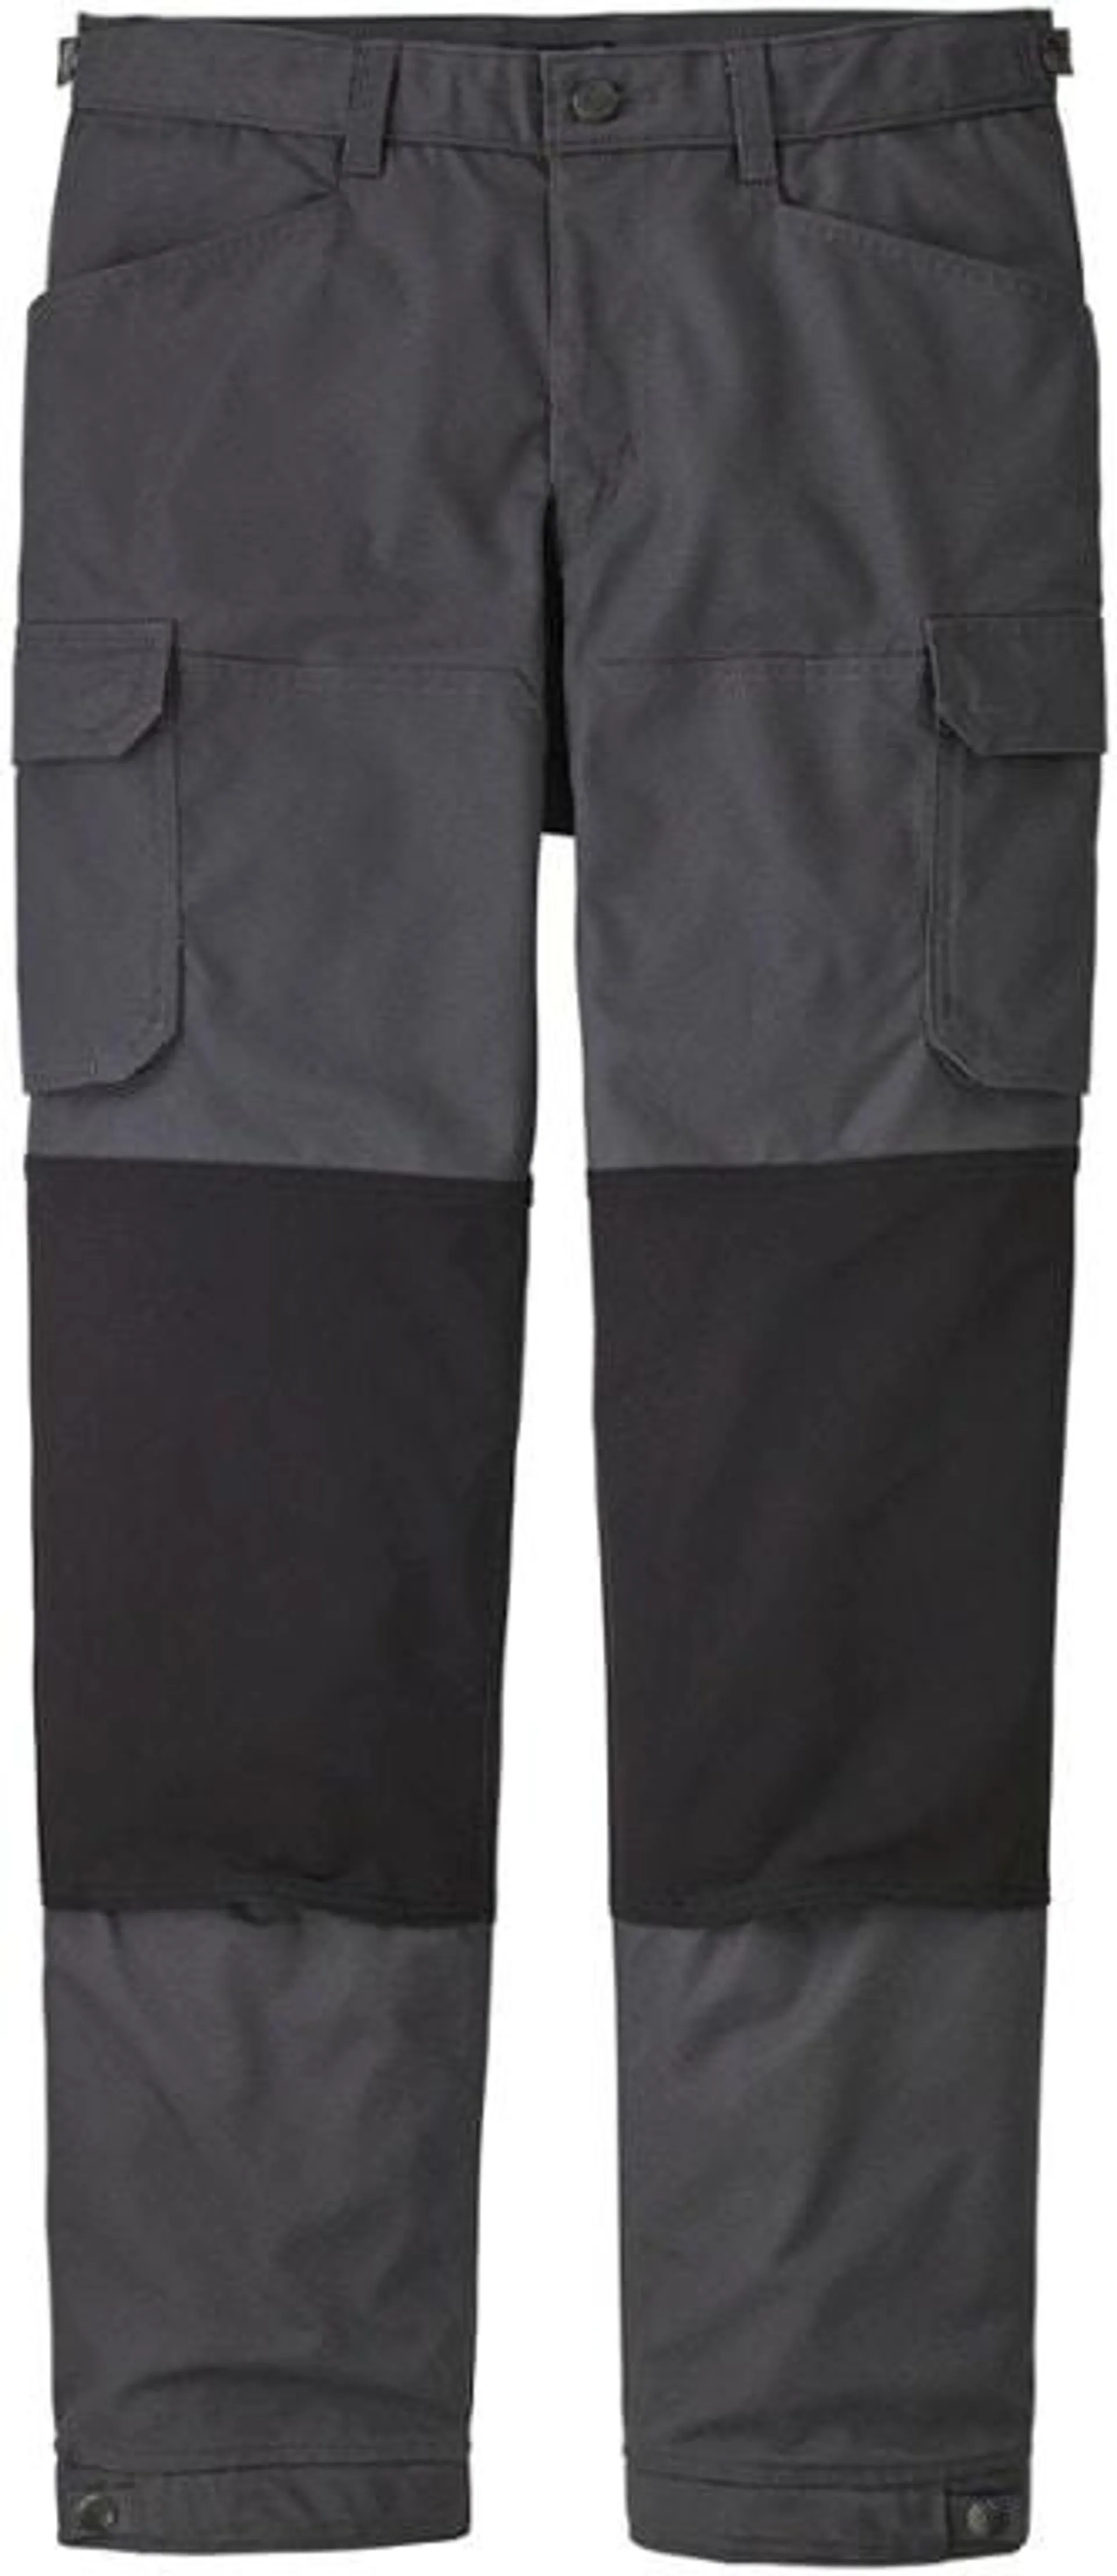 Patagonia Cliffside Rugged Trail Pants - Men's